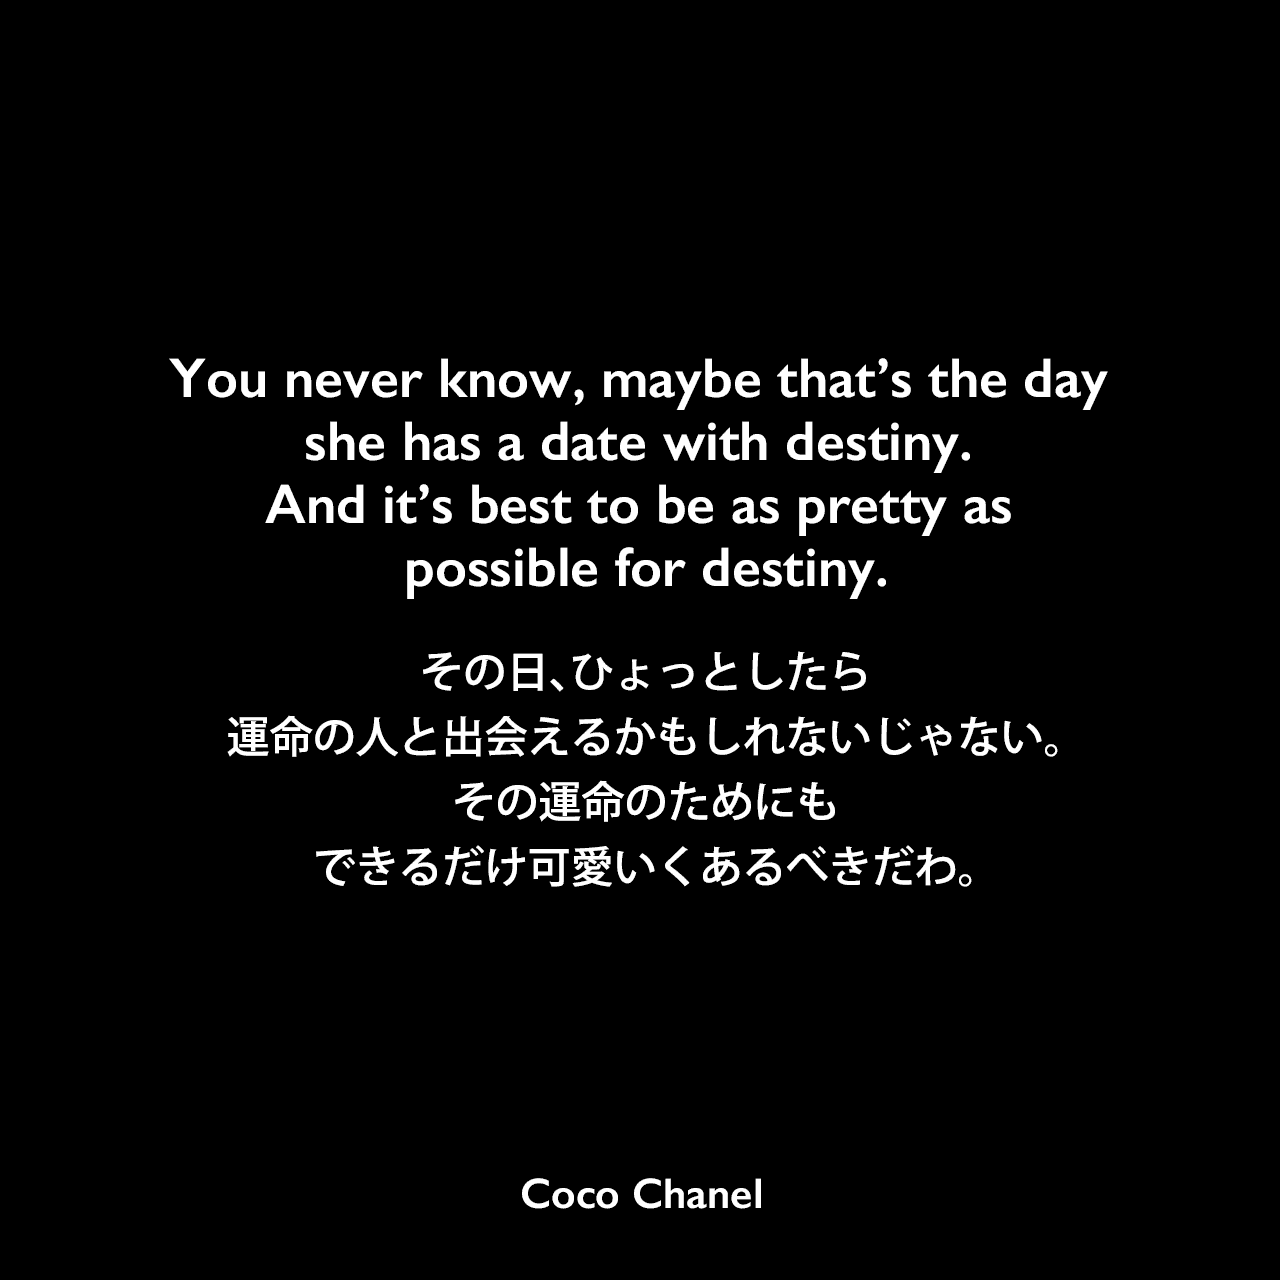 You never know, maybe that’s the day she has a date with destiny. And it’s best to be as pretty as possible for destiny.その日、ひょっとしたら、運命の人と出会えるかもしれないじゃない。その運命のためにも、できるだけ可愛いくあるべきだわ。